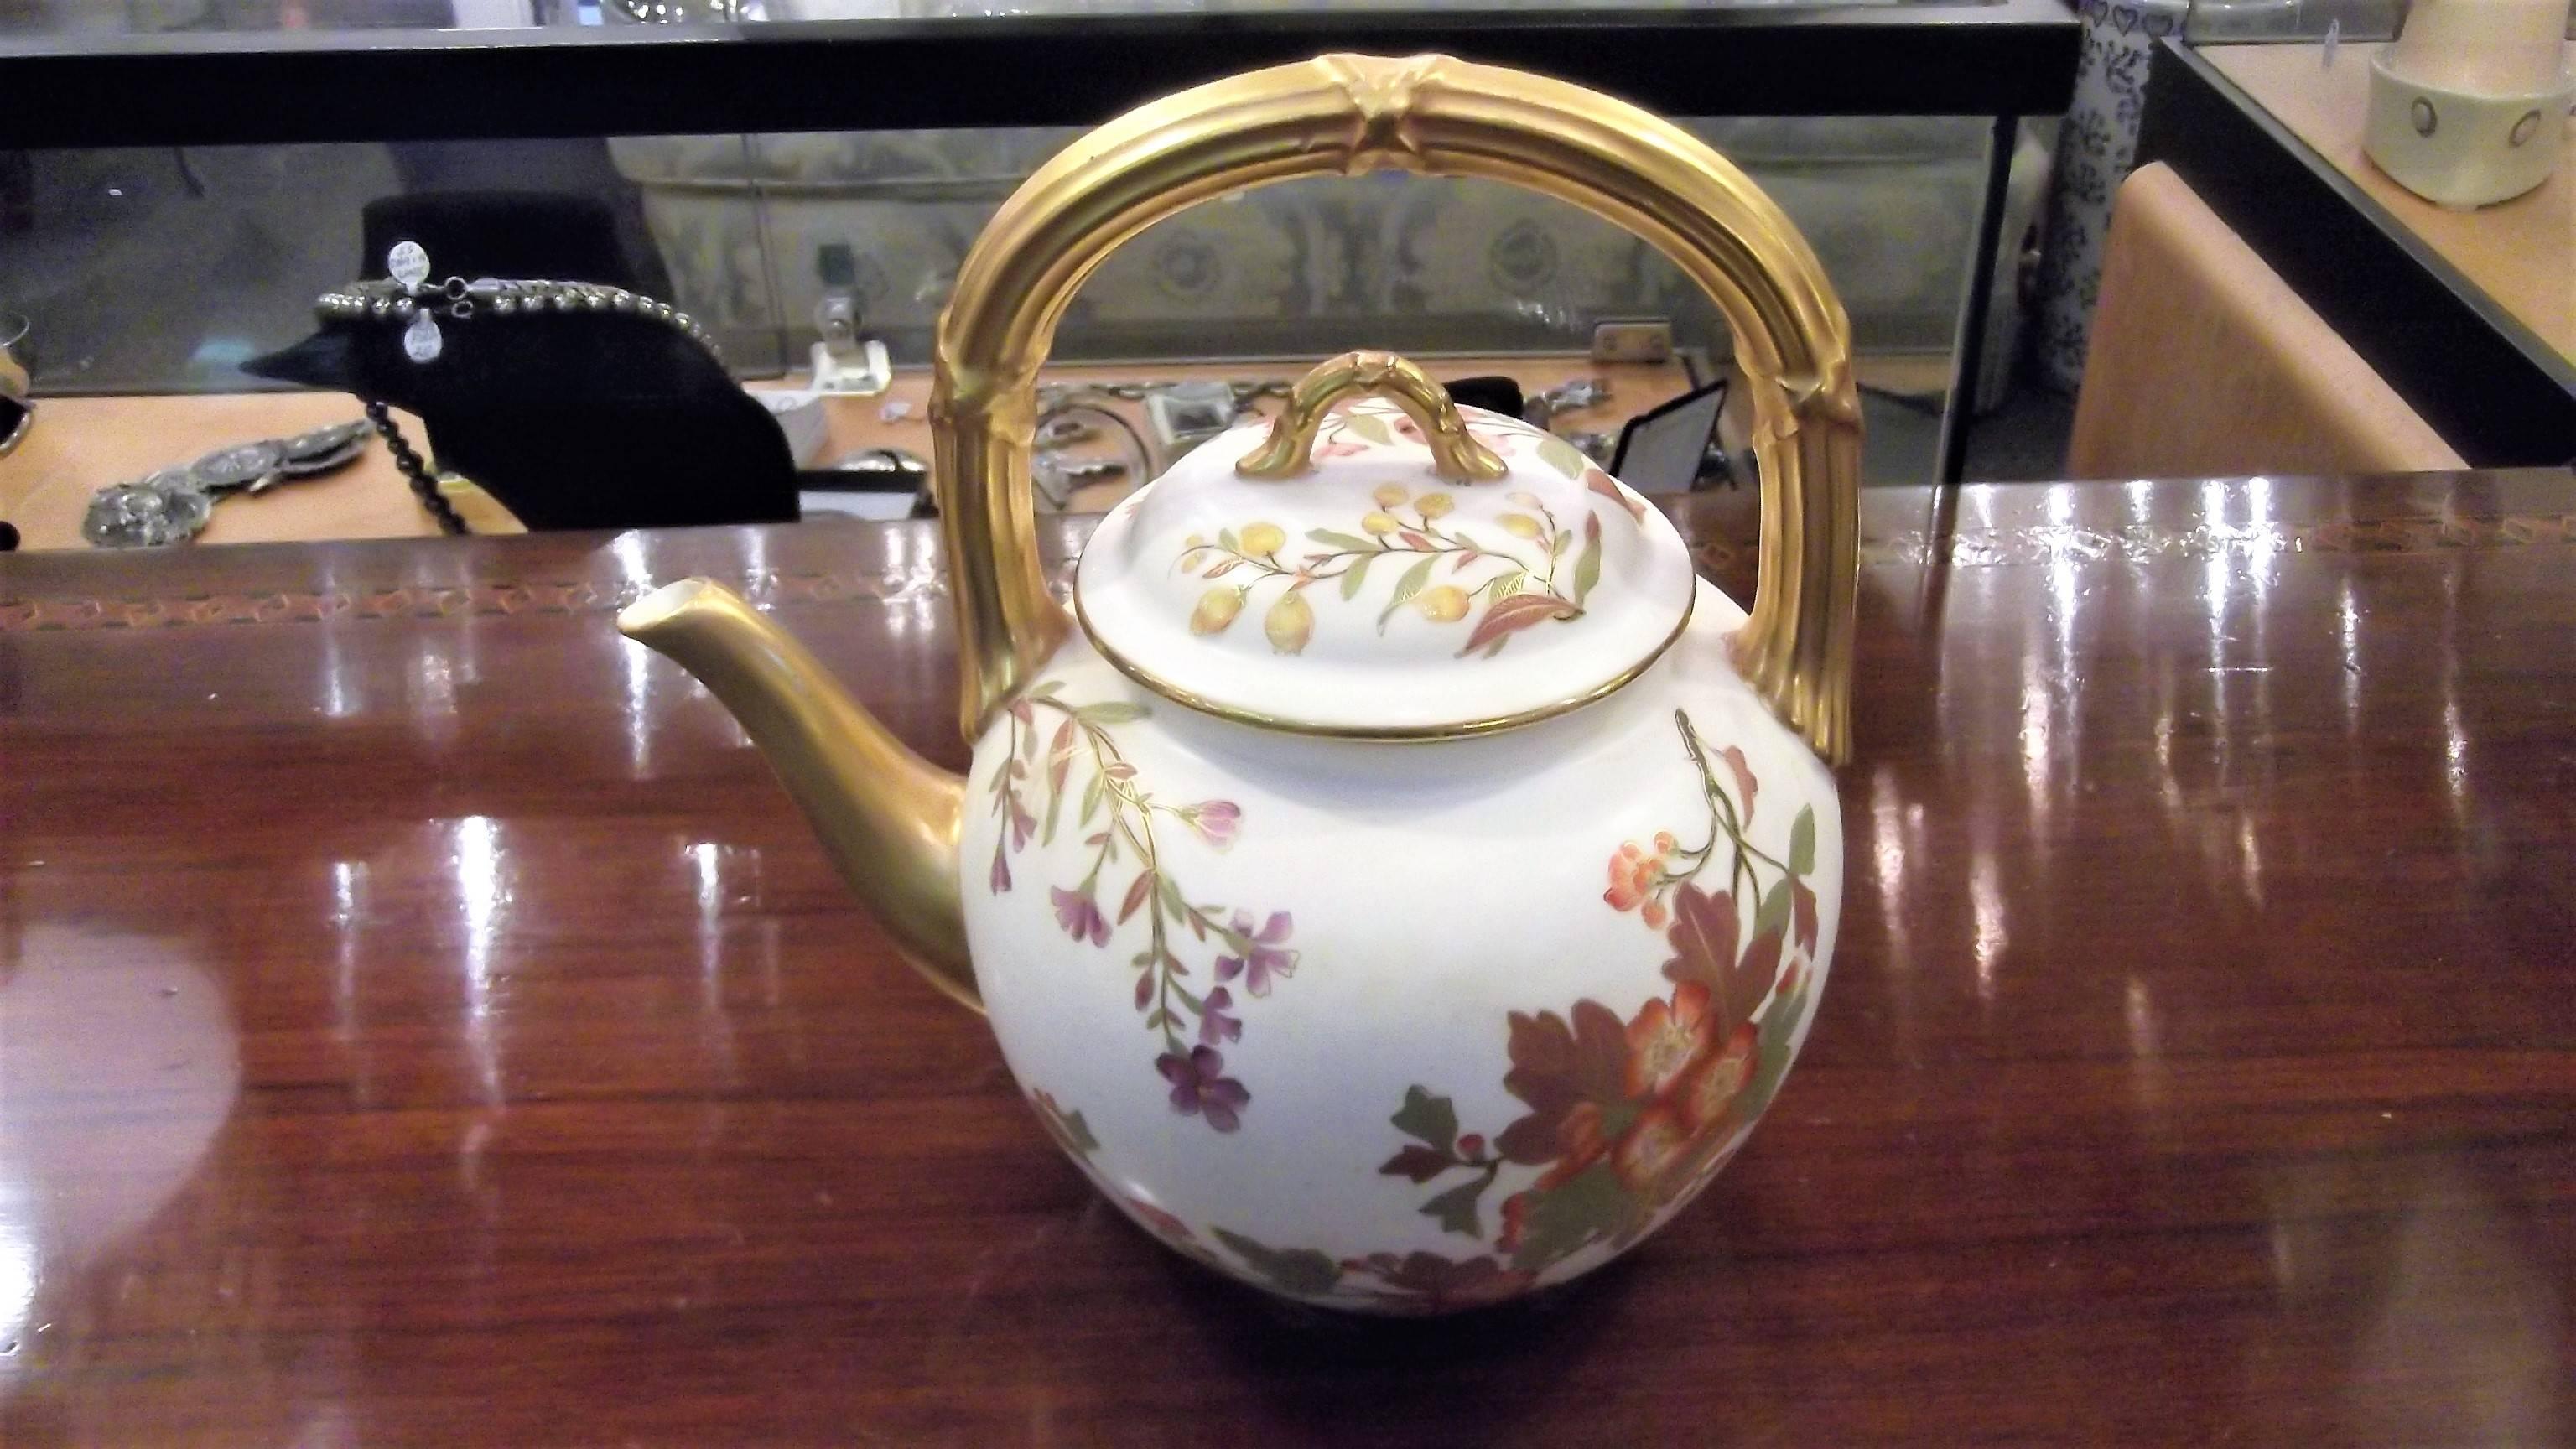 English tea set by Royal Worcester with hand-painted floral decoration. Each piece is decorated with hand applied gold. Year mark is 1889 and represents the Aesthetic Movement of the 19th century.
Teapot is 8